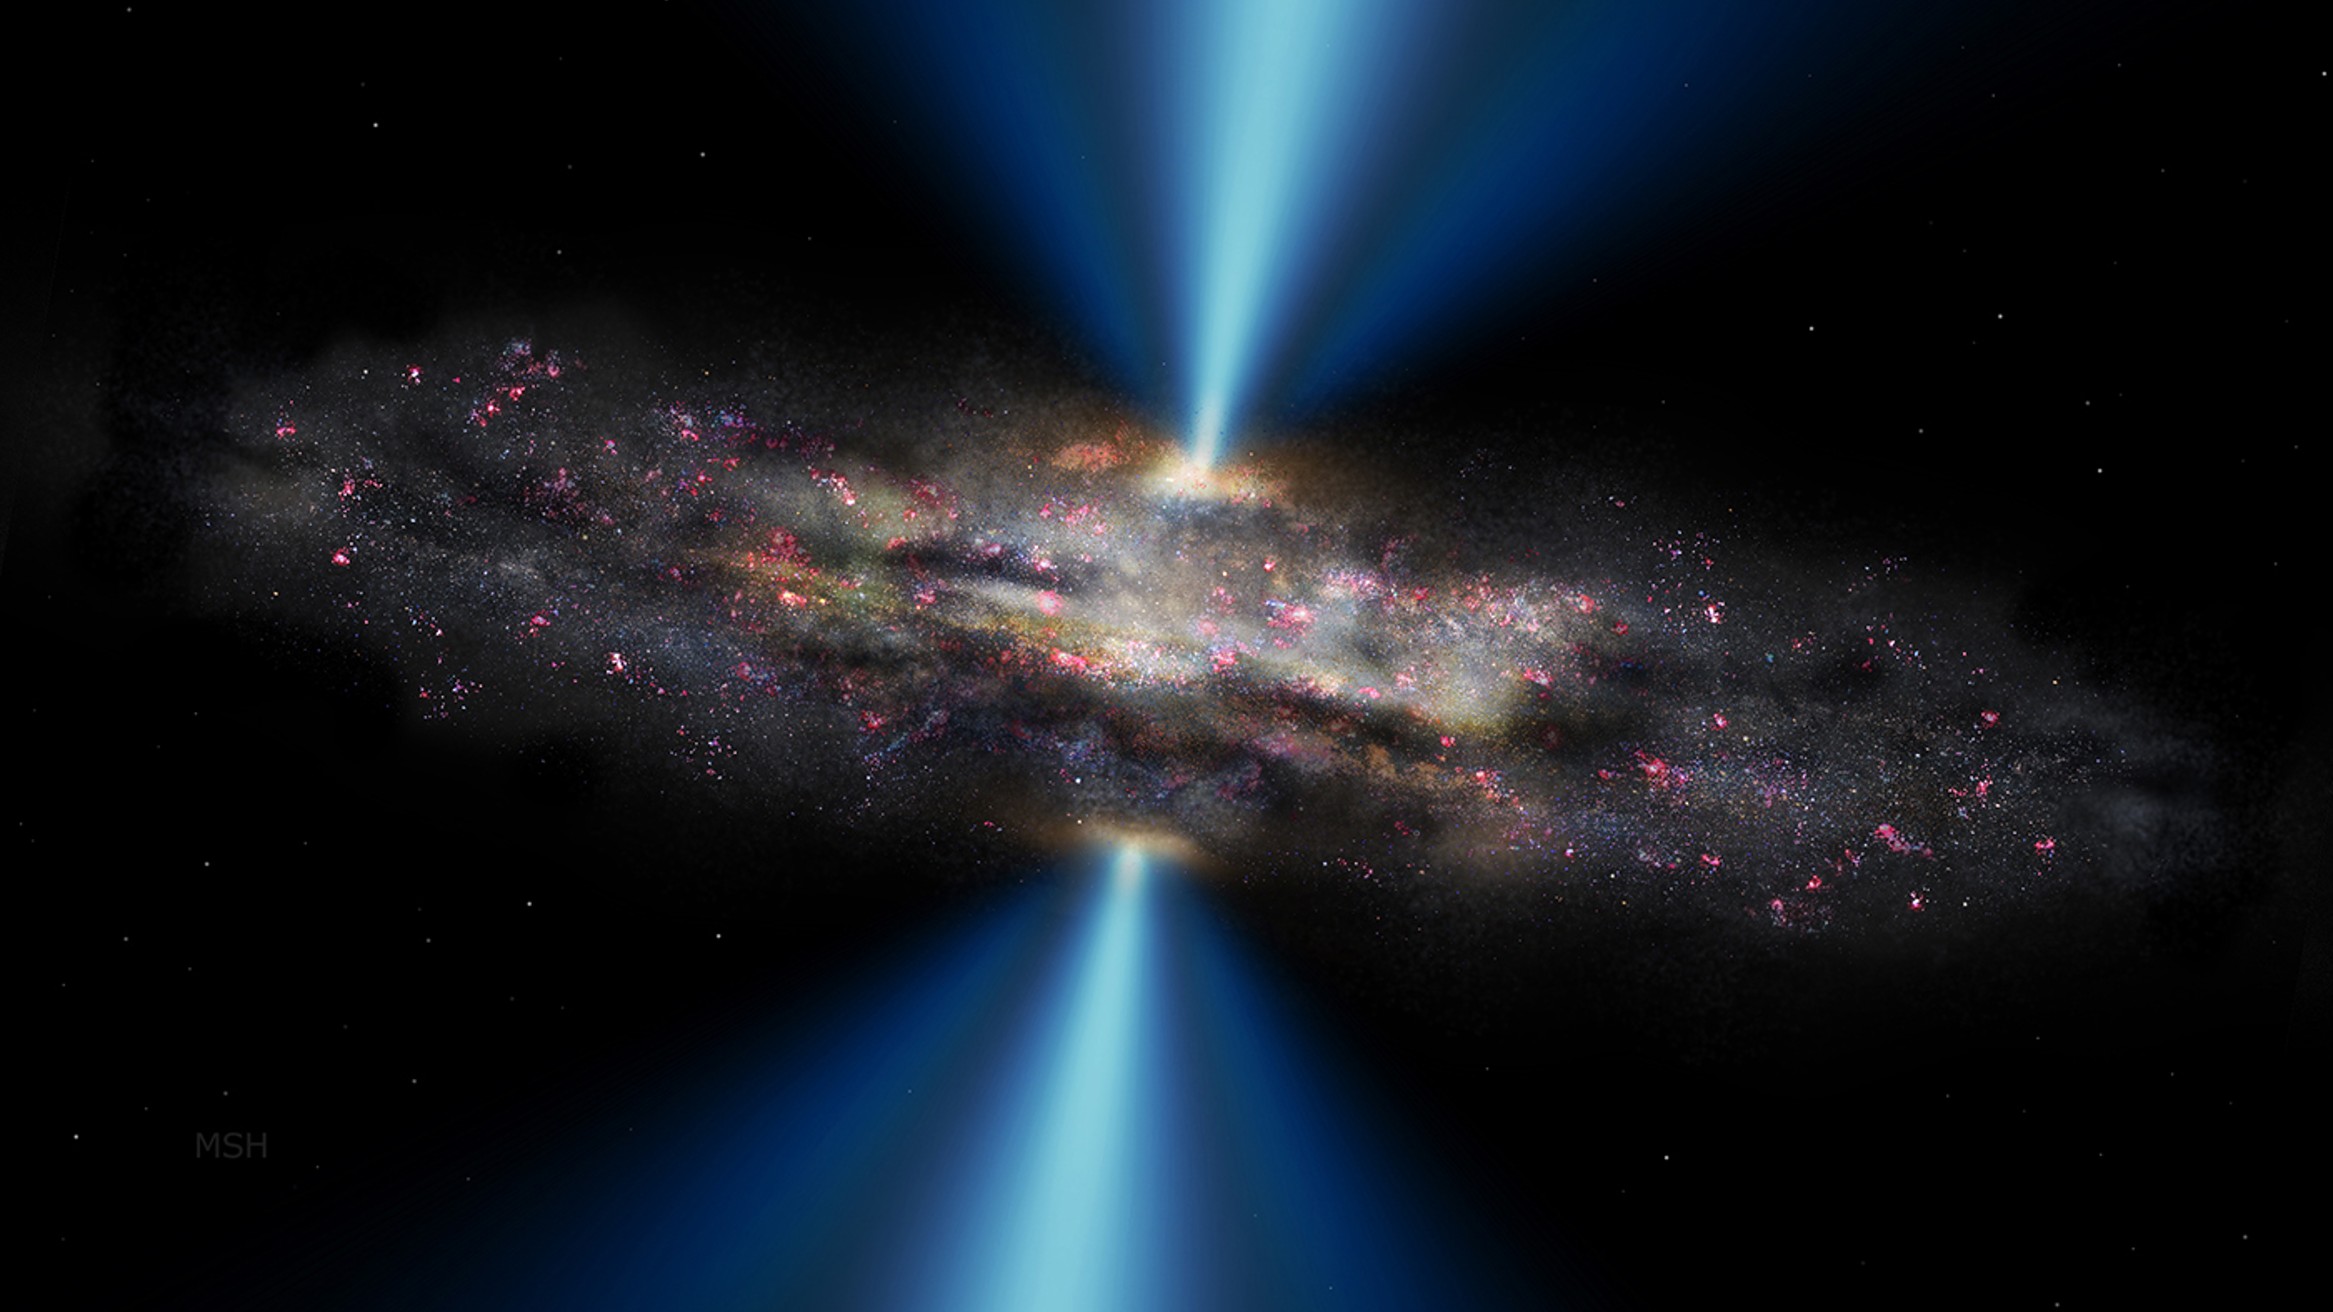 An illustration of a black hole devouring a galaxy